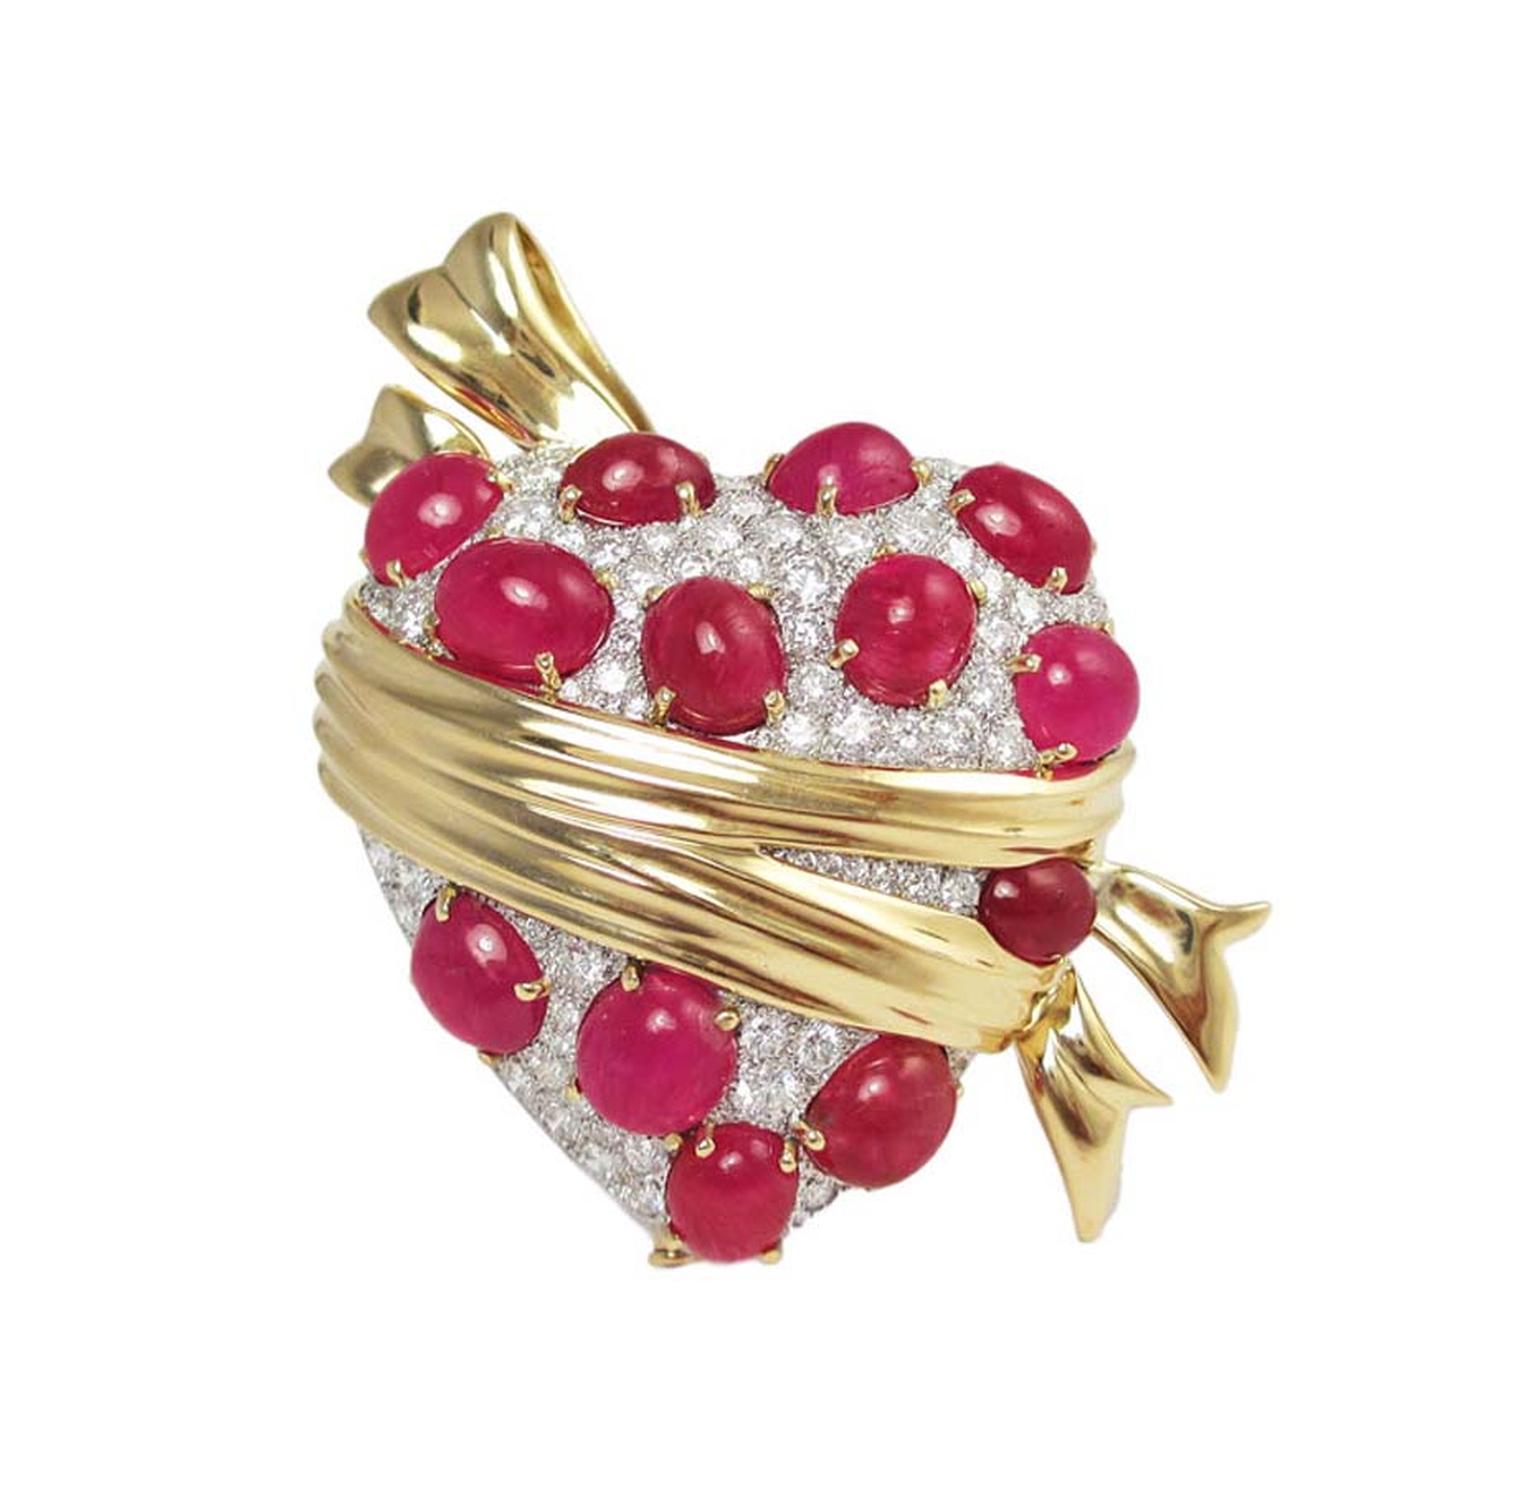 Verdura Sashed Heart brooch, set with rubies and diamonds in gold, was first commissioned by Tyrone Power for his wife Anabella in 1941 and has been recreated to celebrate Verdura's 75th anniversary.